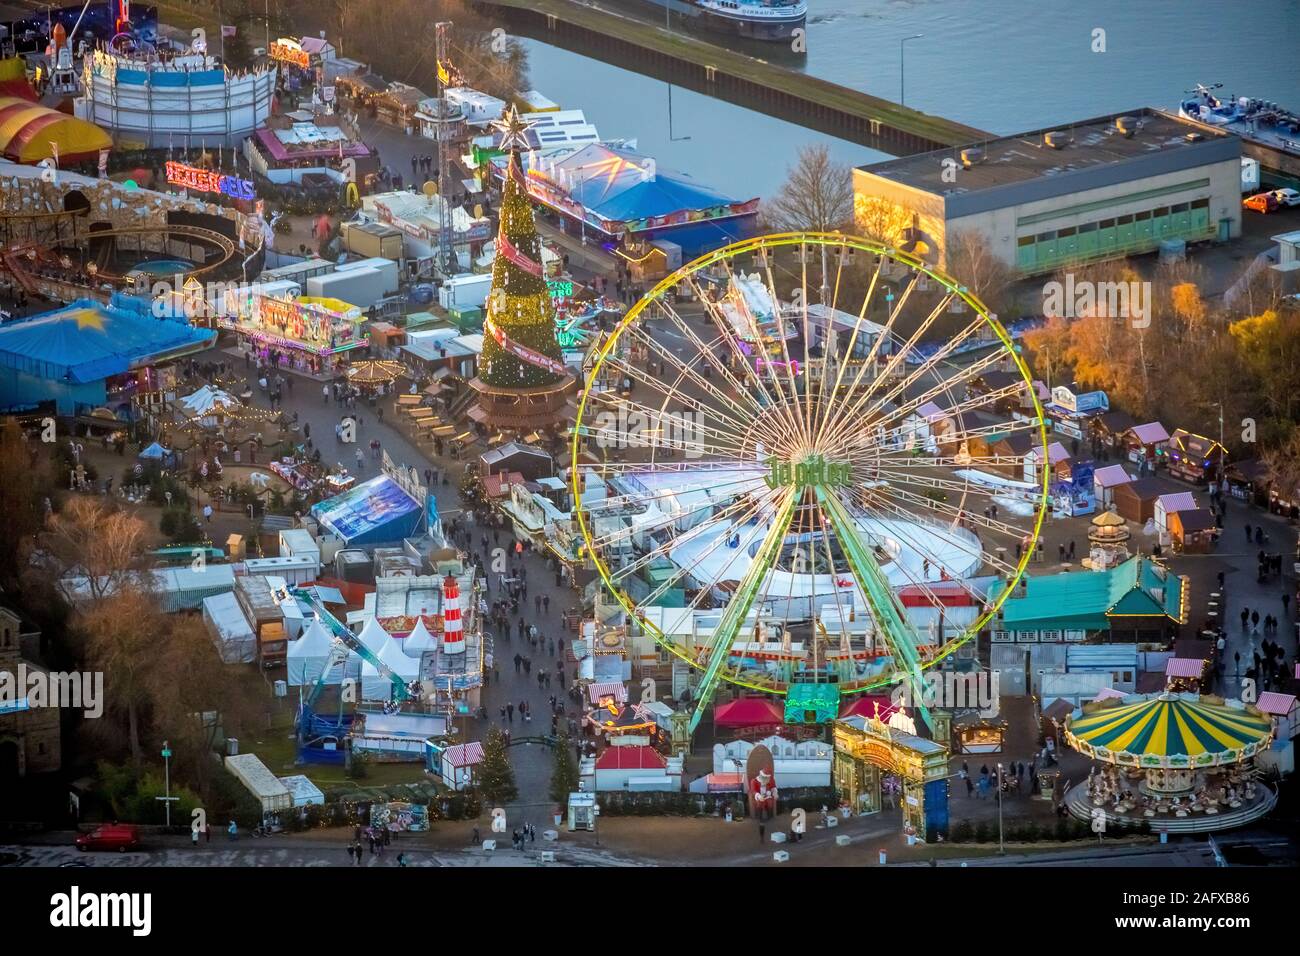 Aerial view of the Cranger Christmas magic, Herne Christmas market, mobile Christmas tree, Ferris wheel, Crange, Herne, Ruhr area, North Rhine-Westpha Stock Photo